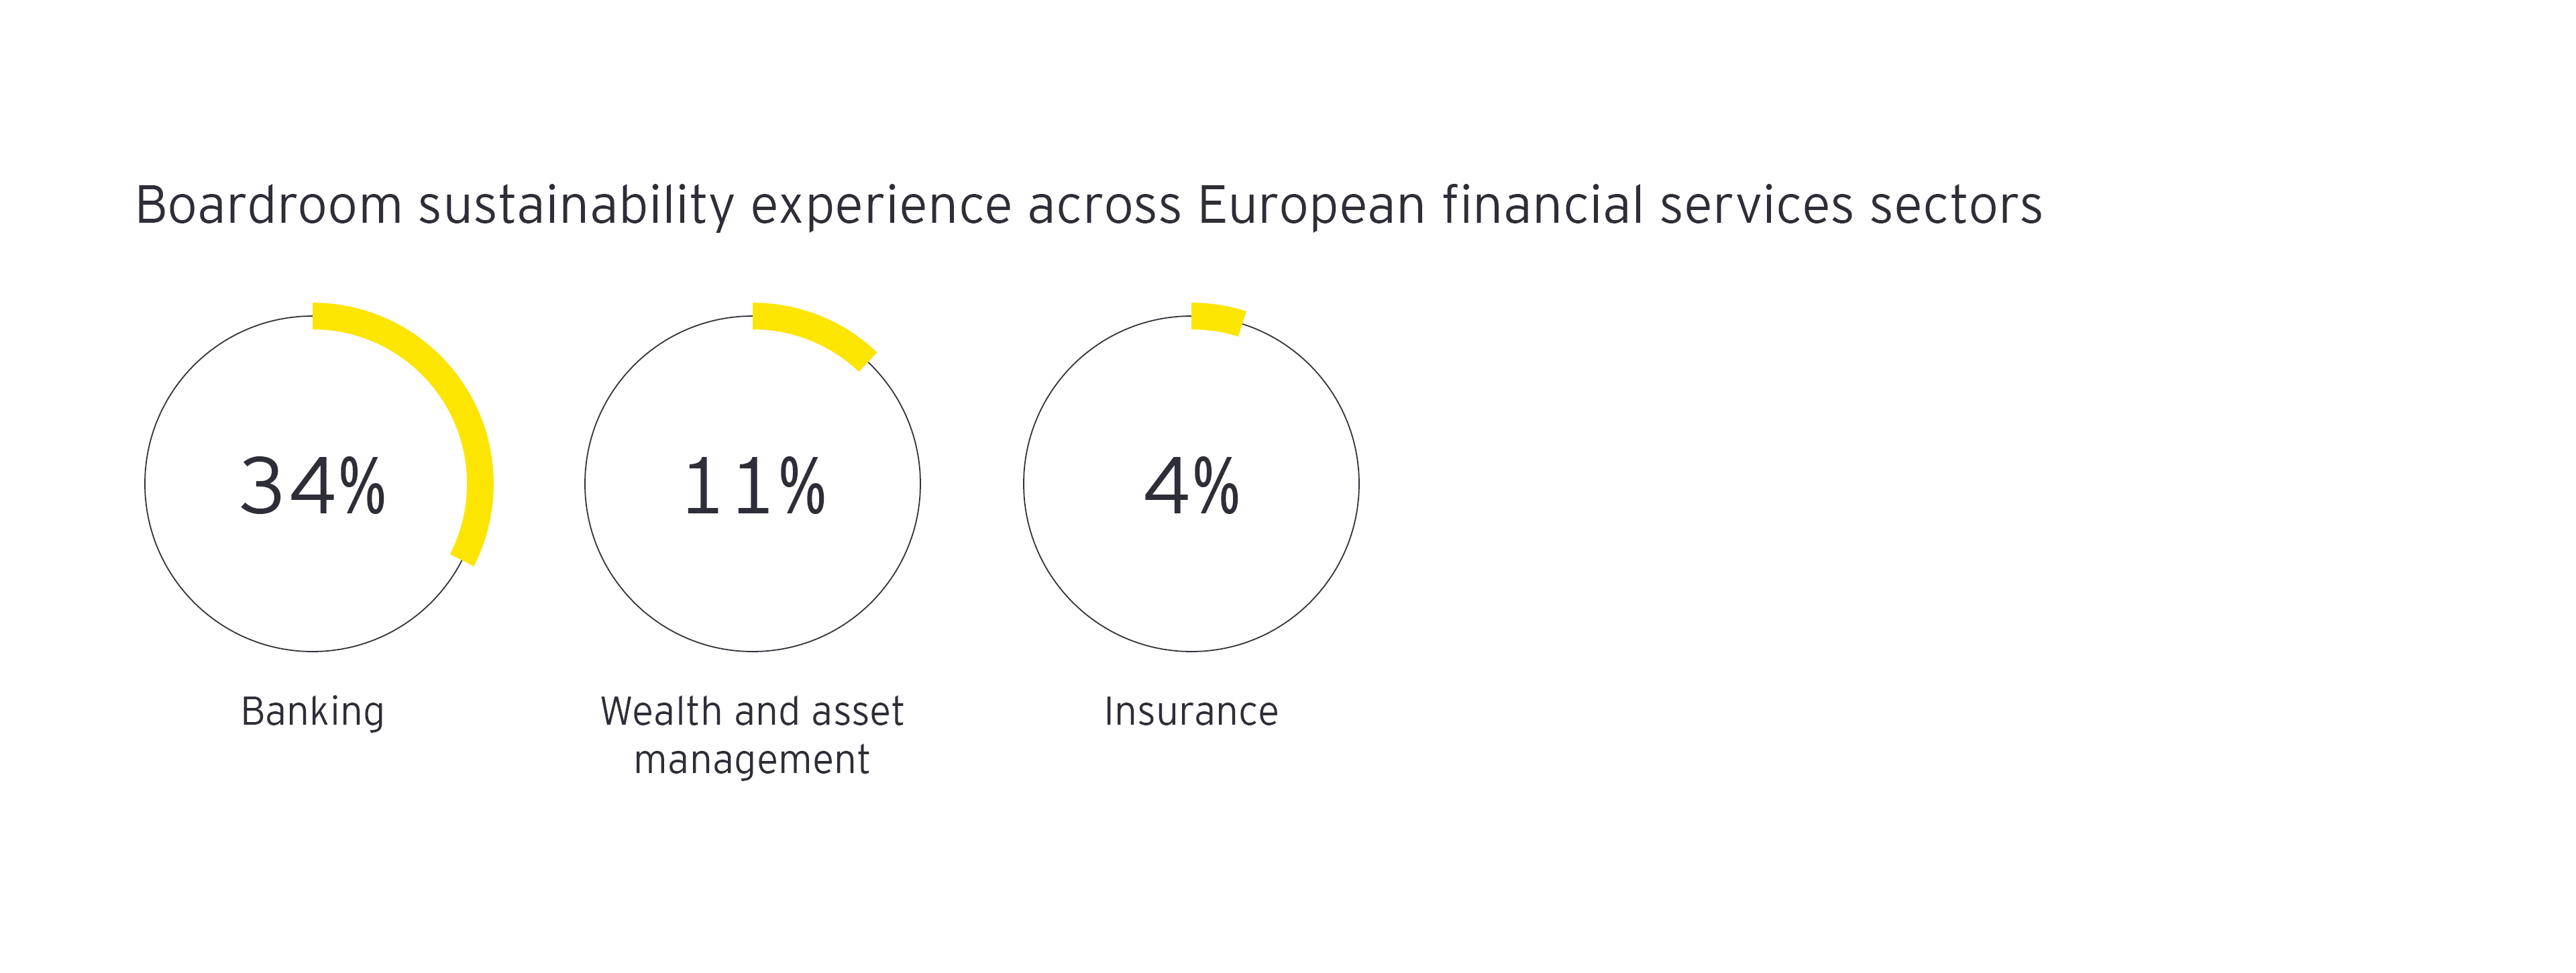 Boardroom sustainability experience across European financial services sectors 